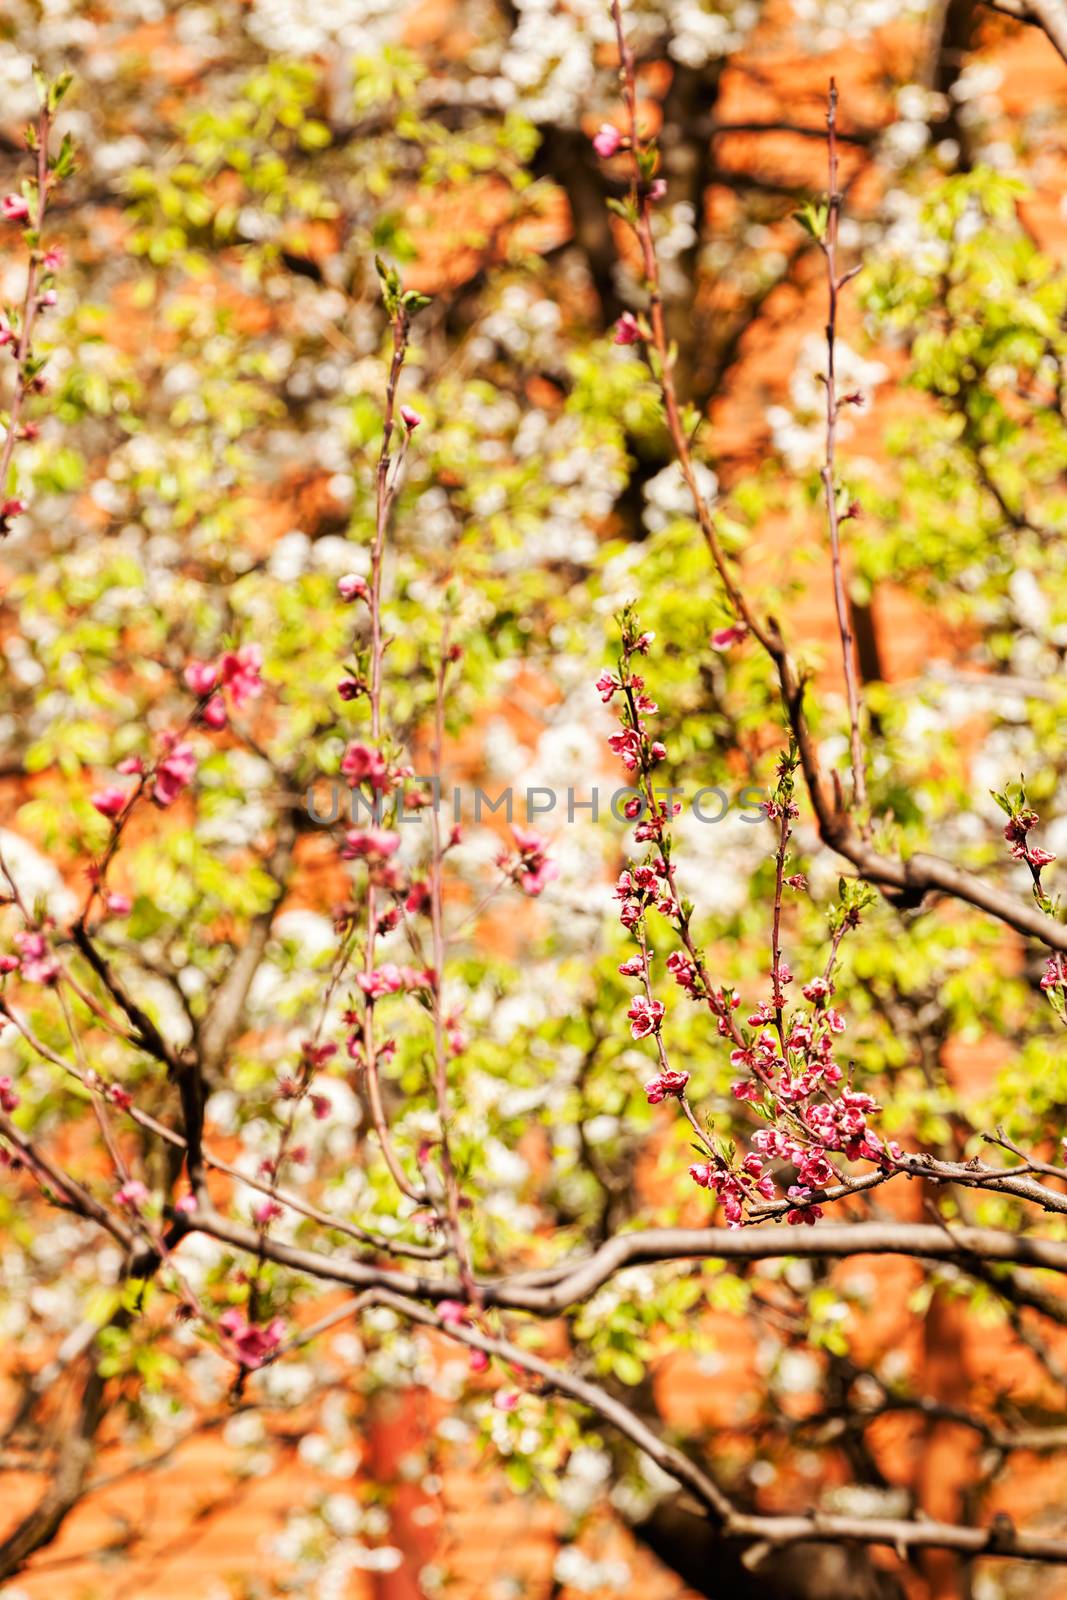 tree with pink blossoms in the city, note shallow depth of field